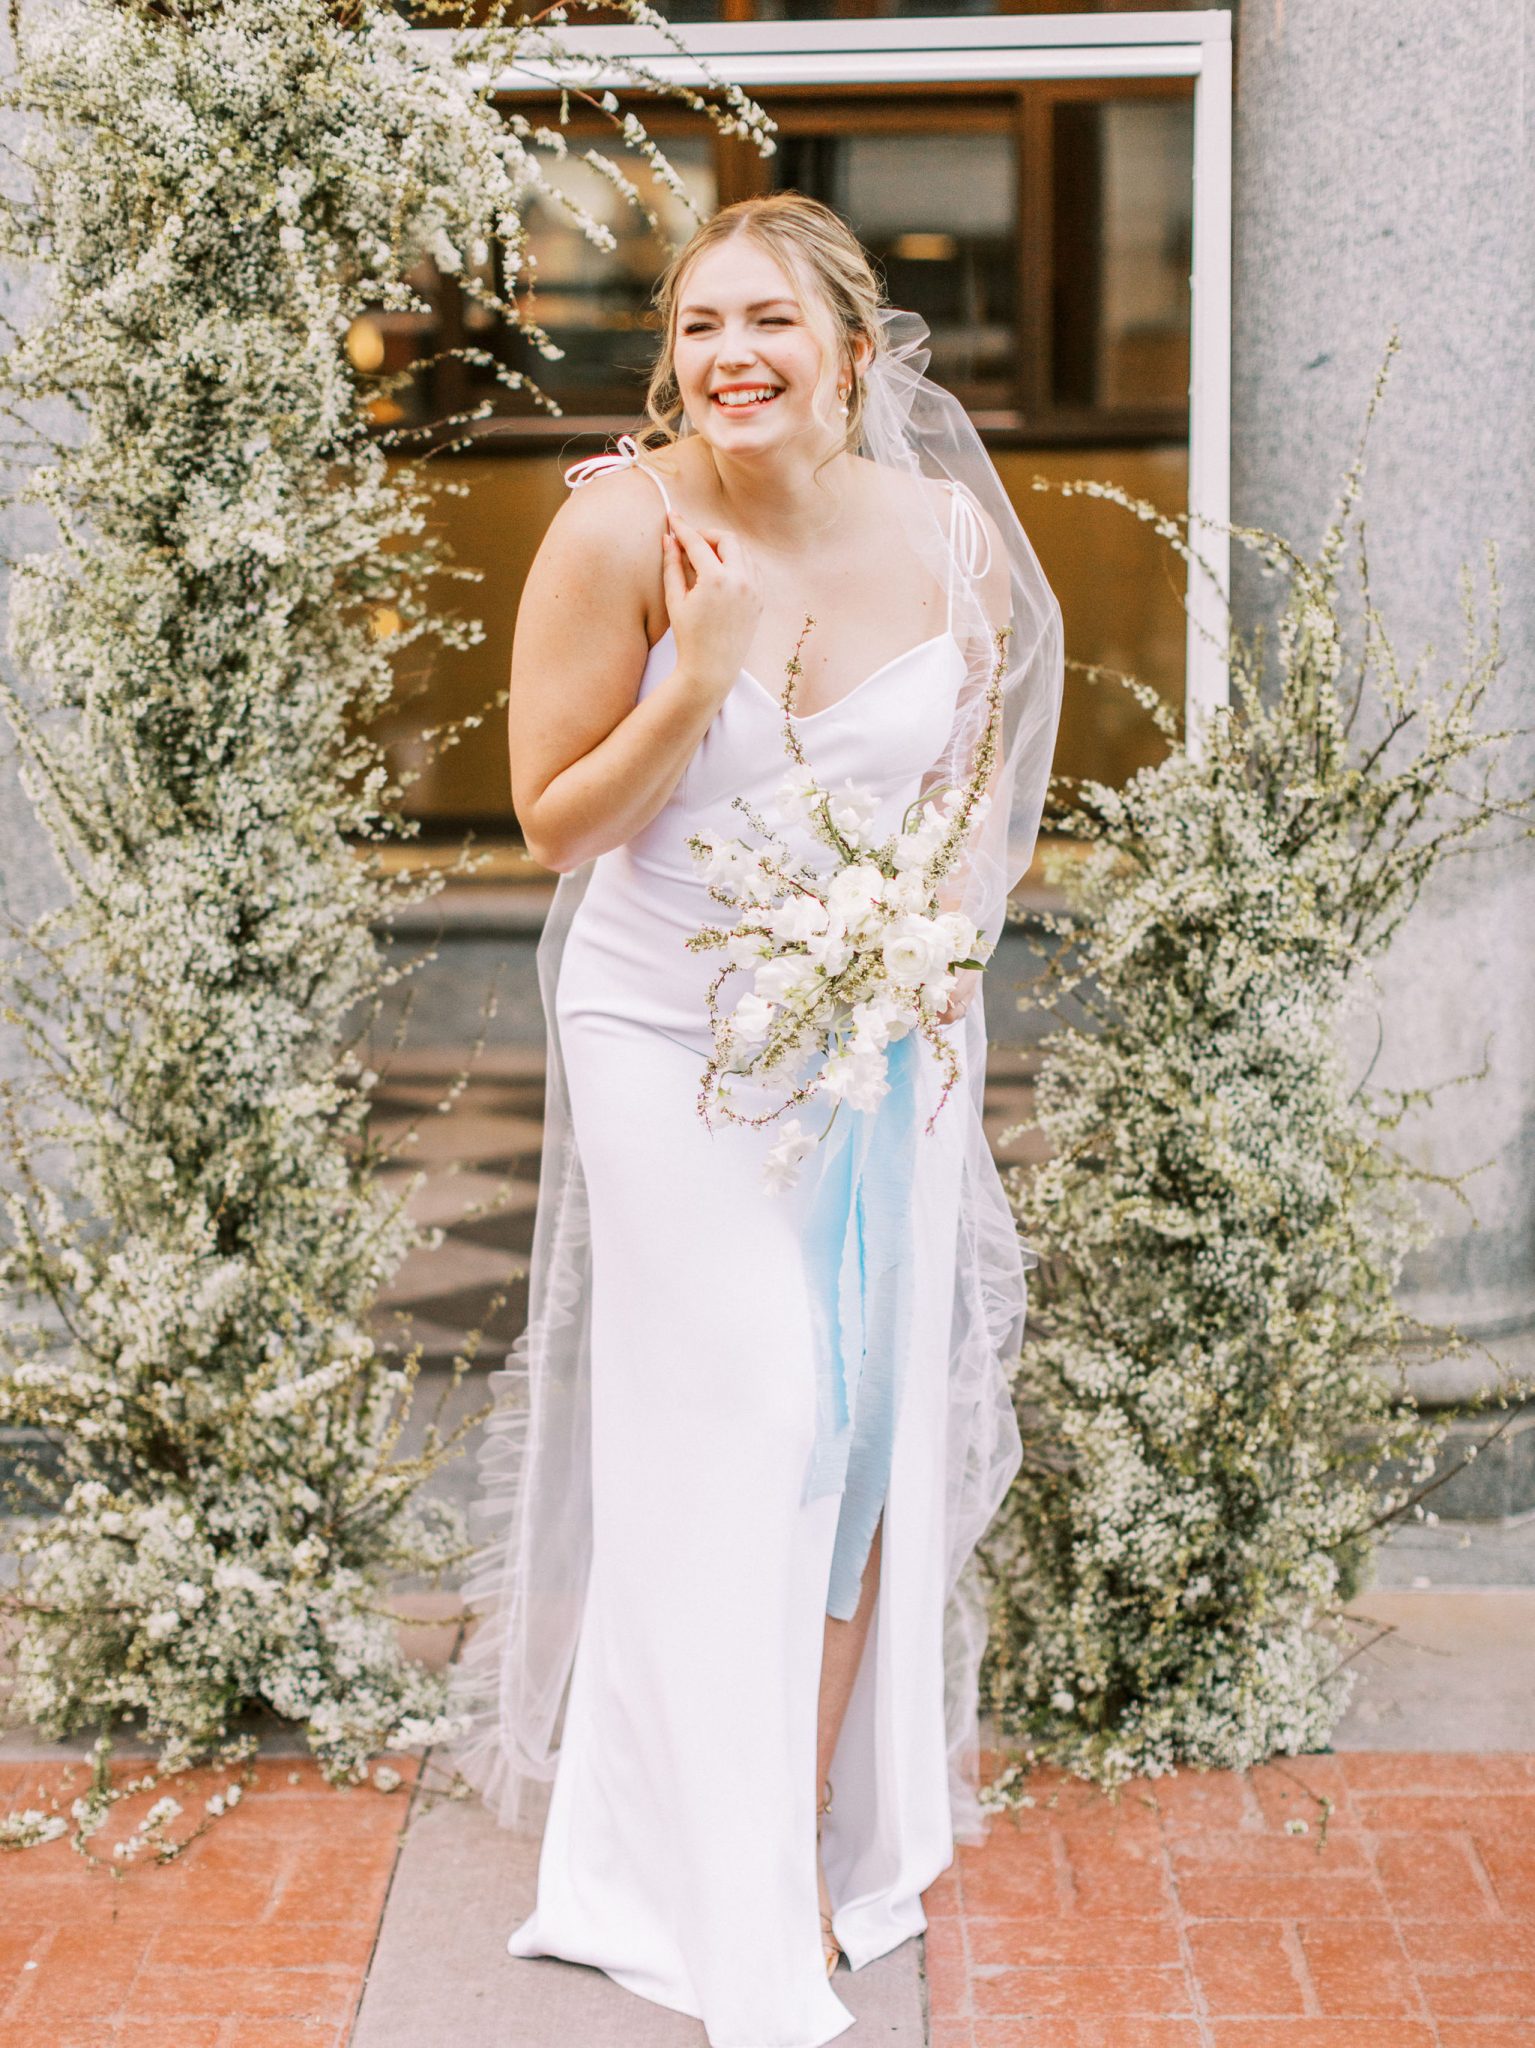 Minimalist modern bride inspiration with a slip white dress, monochromatic bouquet and robin's egg blue accents